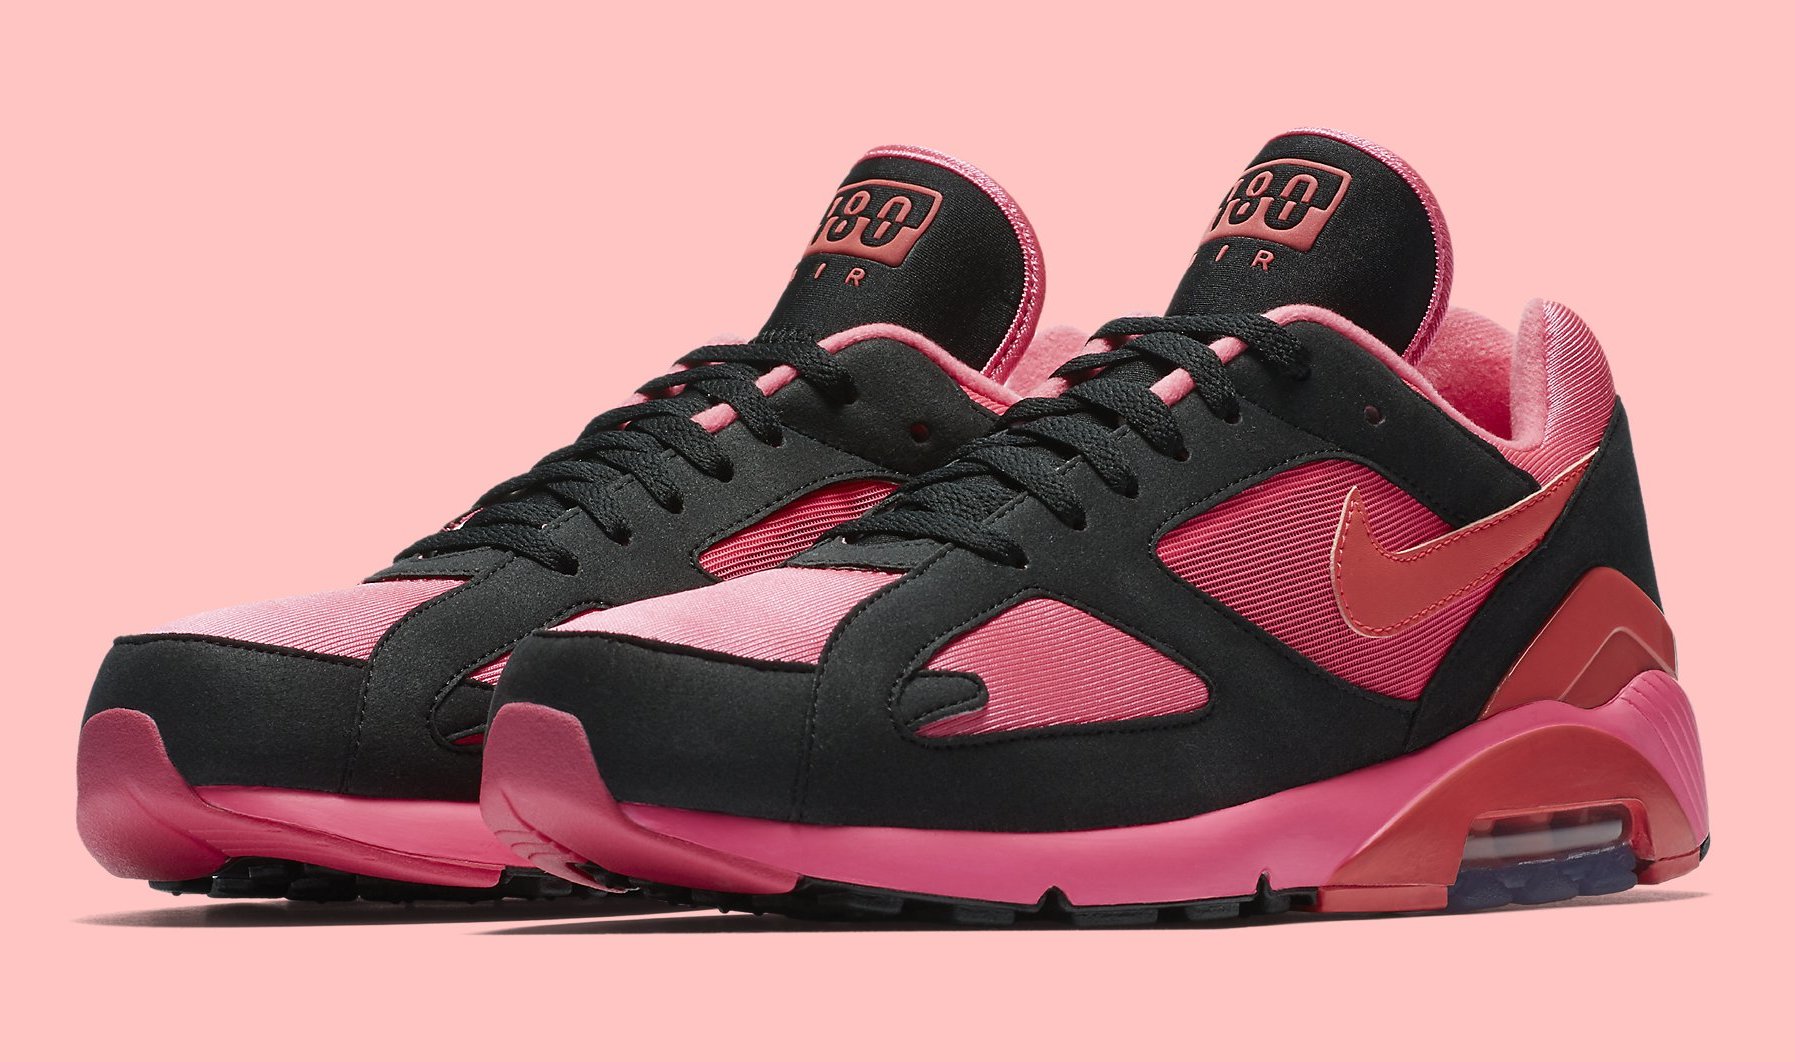 Is Comme des Garçons' Air Max 180 Collab Getting a Wider